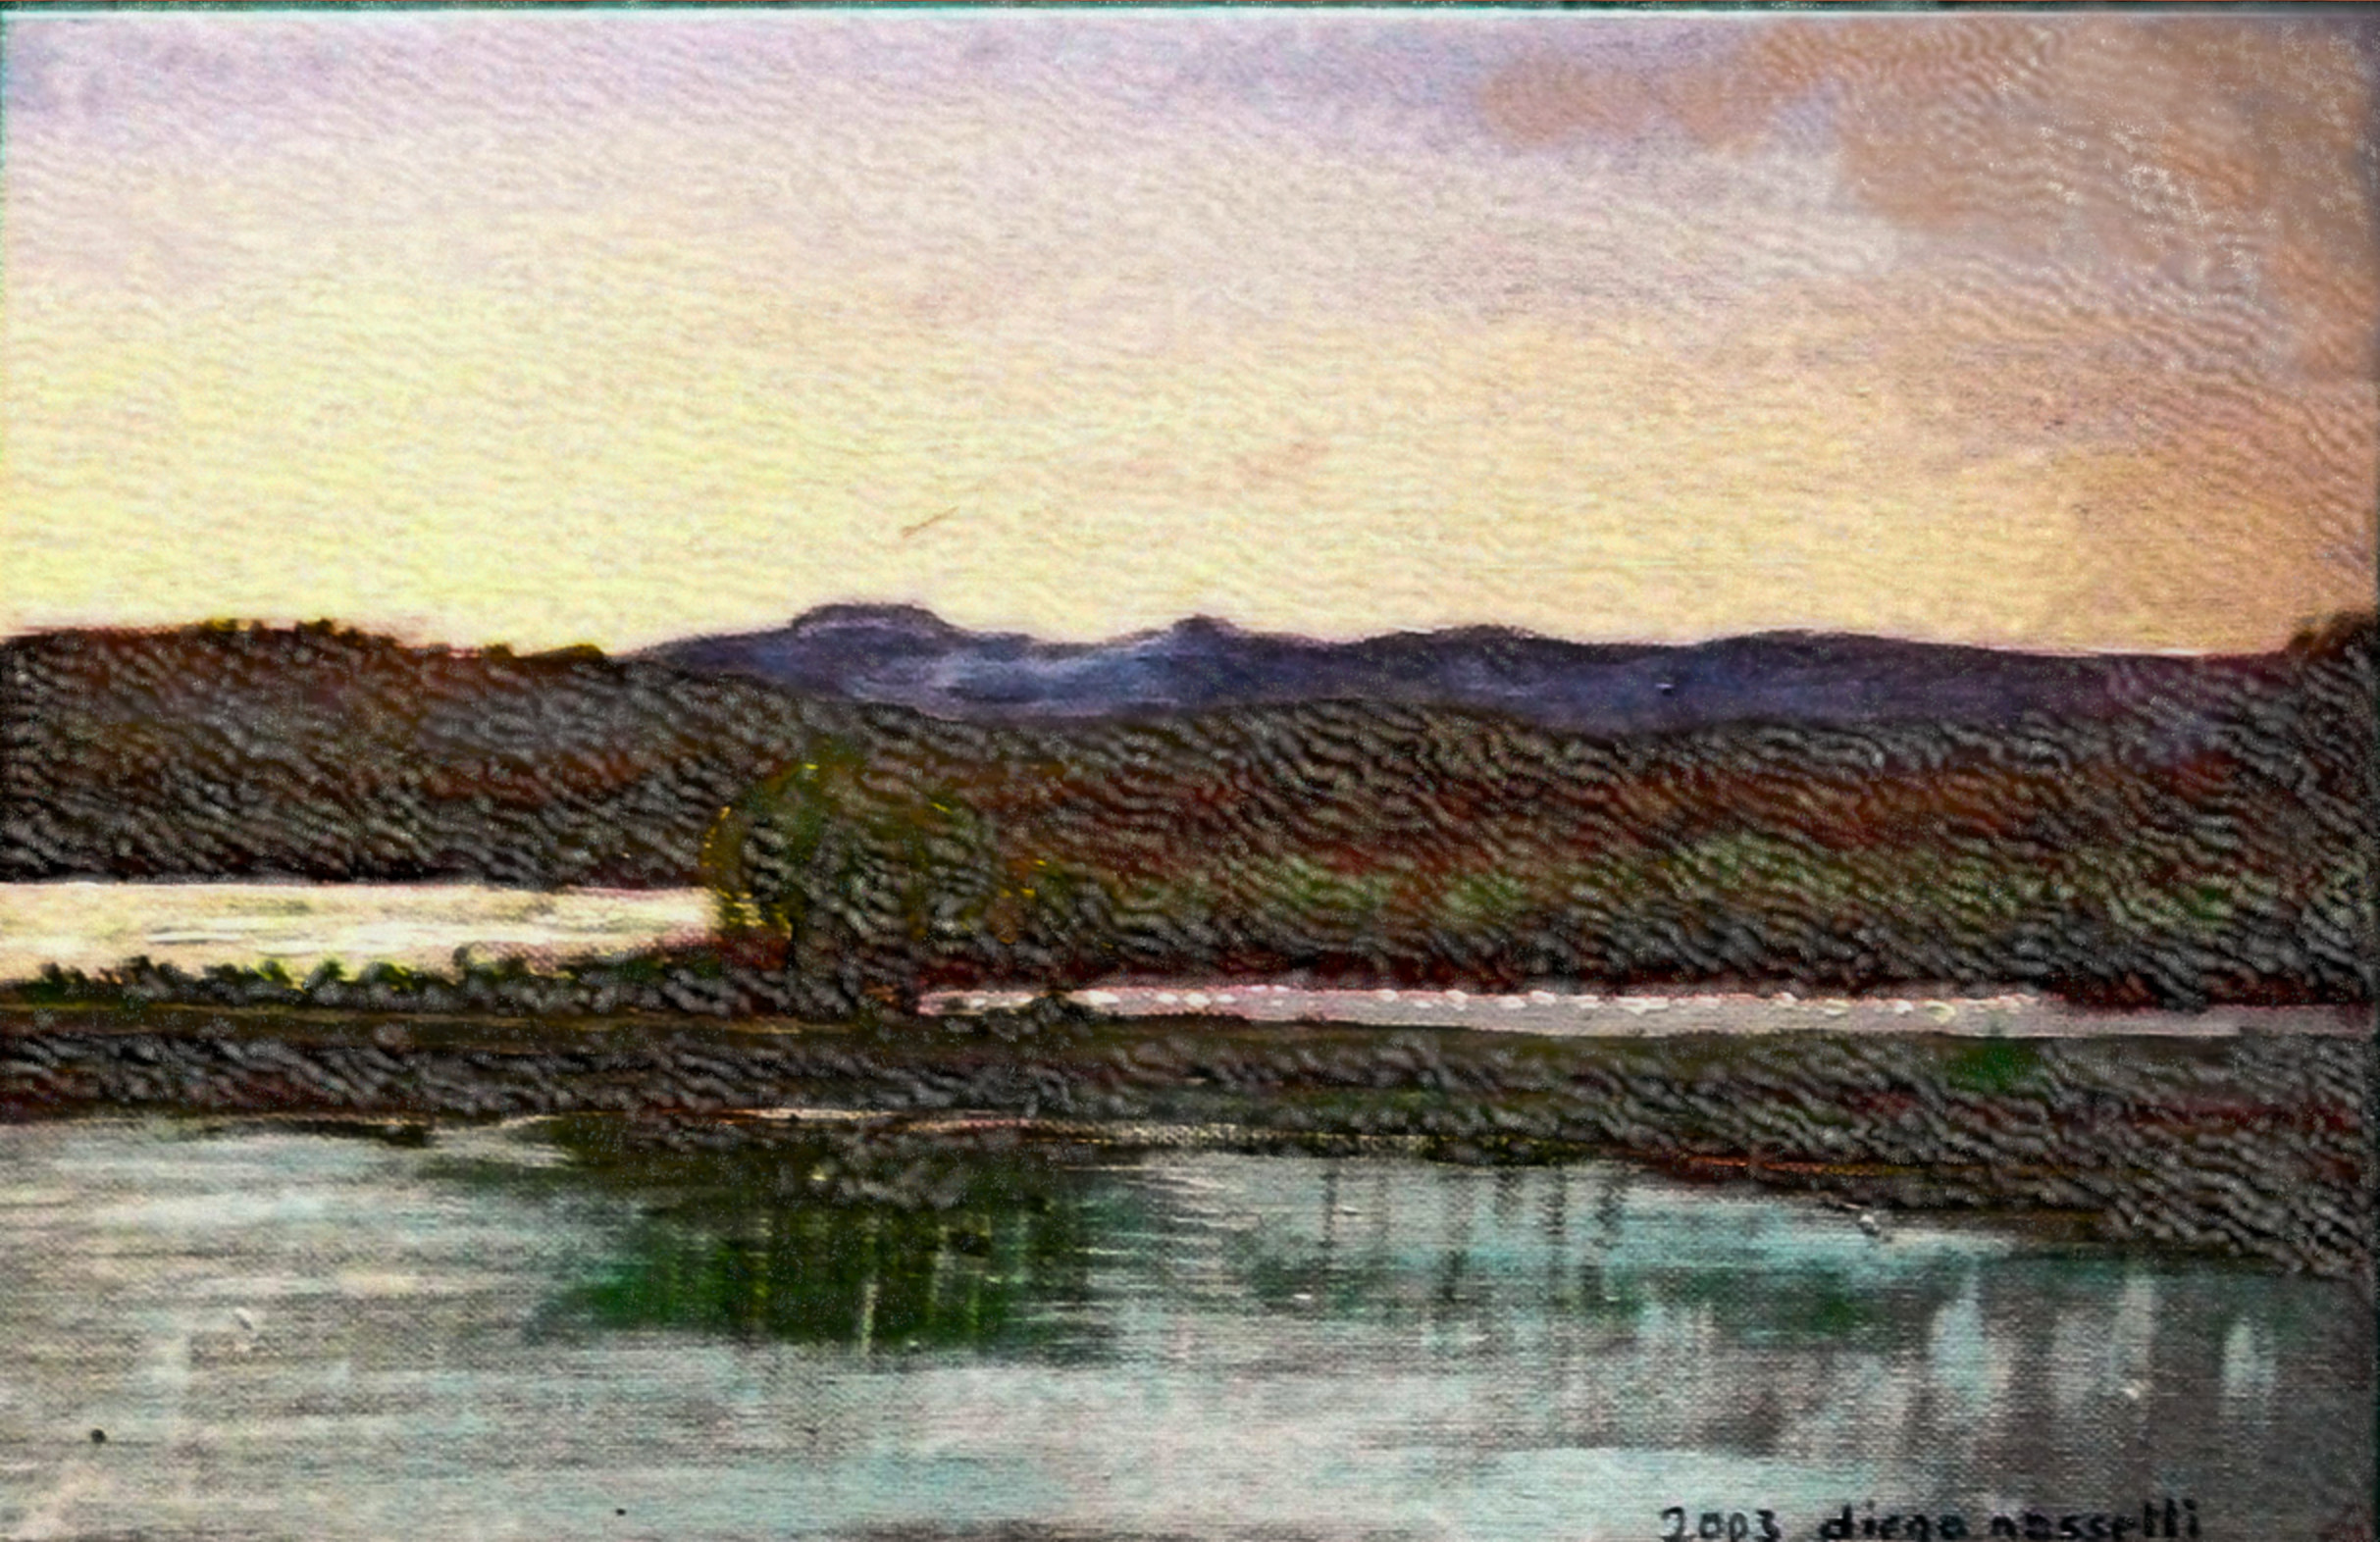 2020-12-16 06-49-10 lago-di-chiusi-B, stroked  using 9 colours giving 75.0% influence to the edges.jpeg